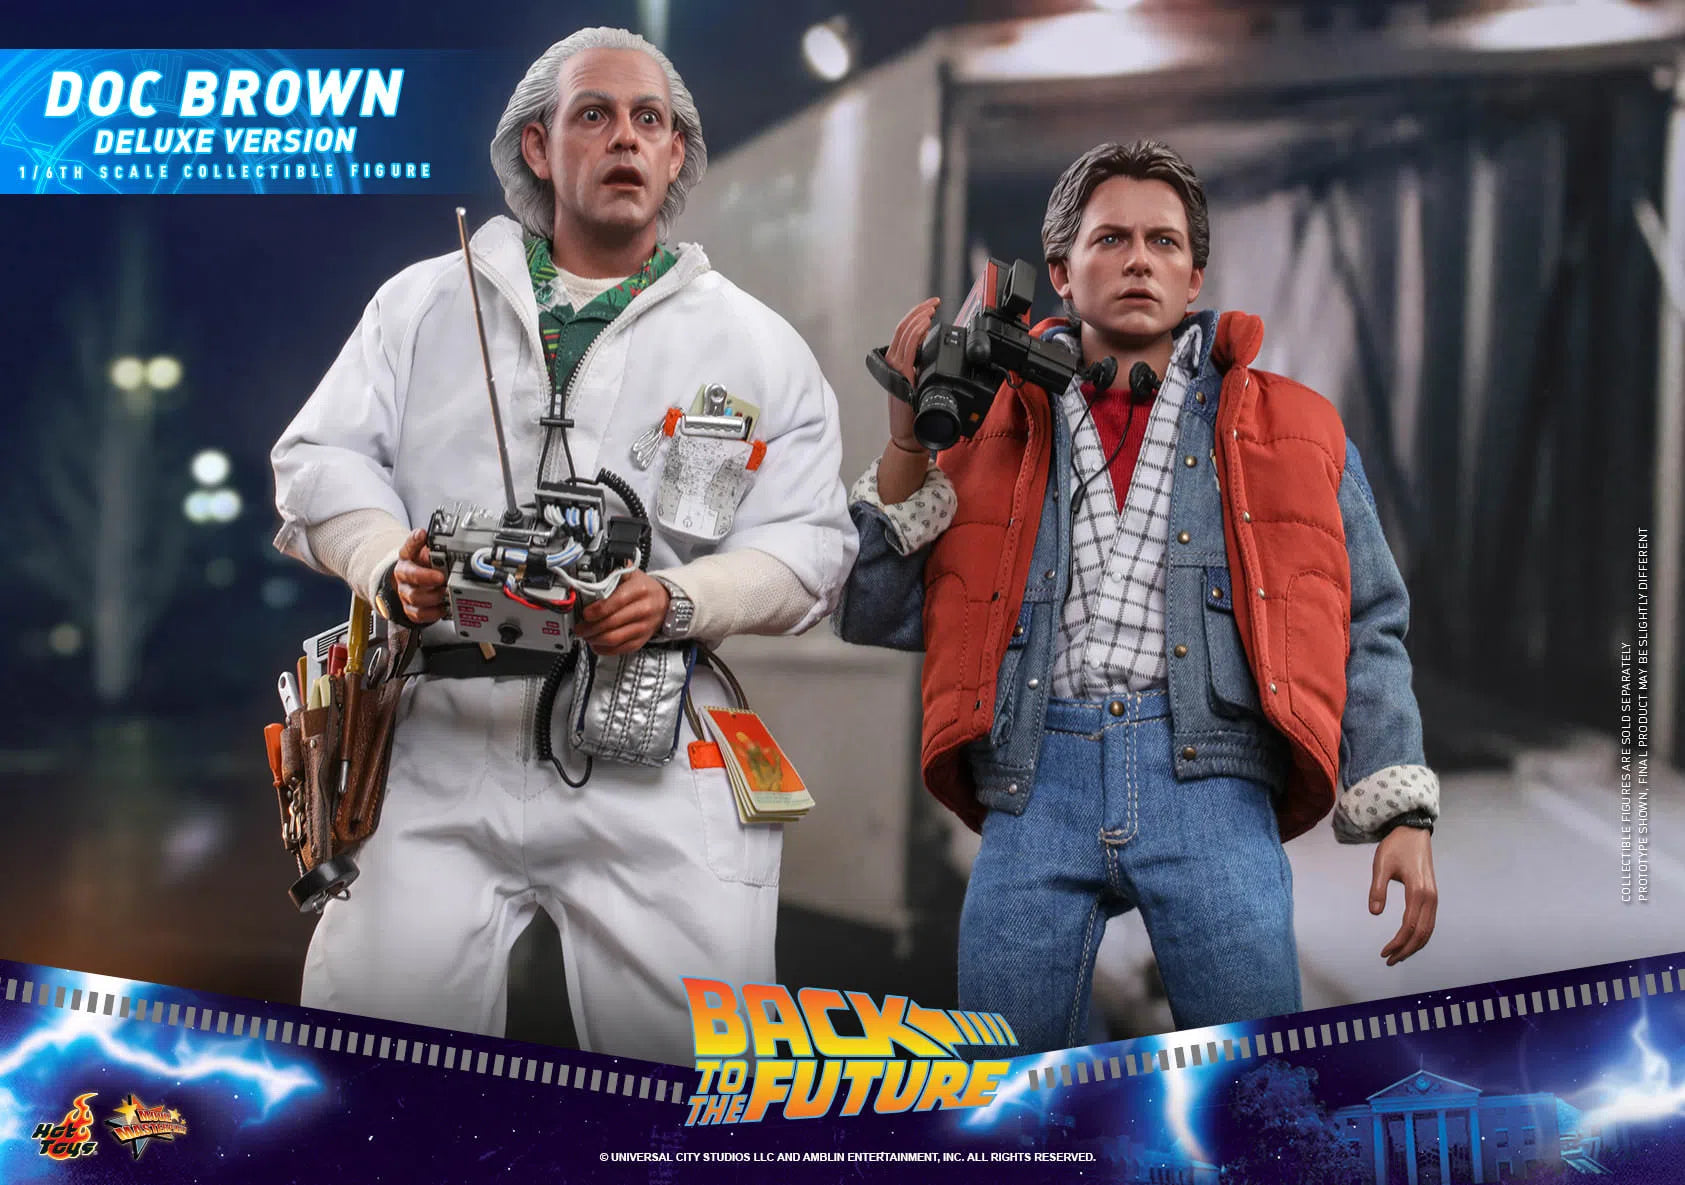 Doc Brown: Back To The Future: Deluxe Edition: MMS610 Hot Toys